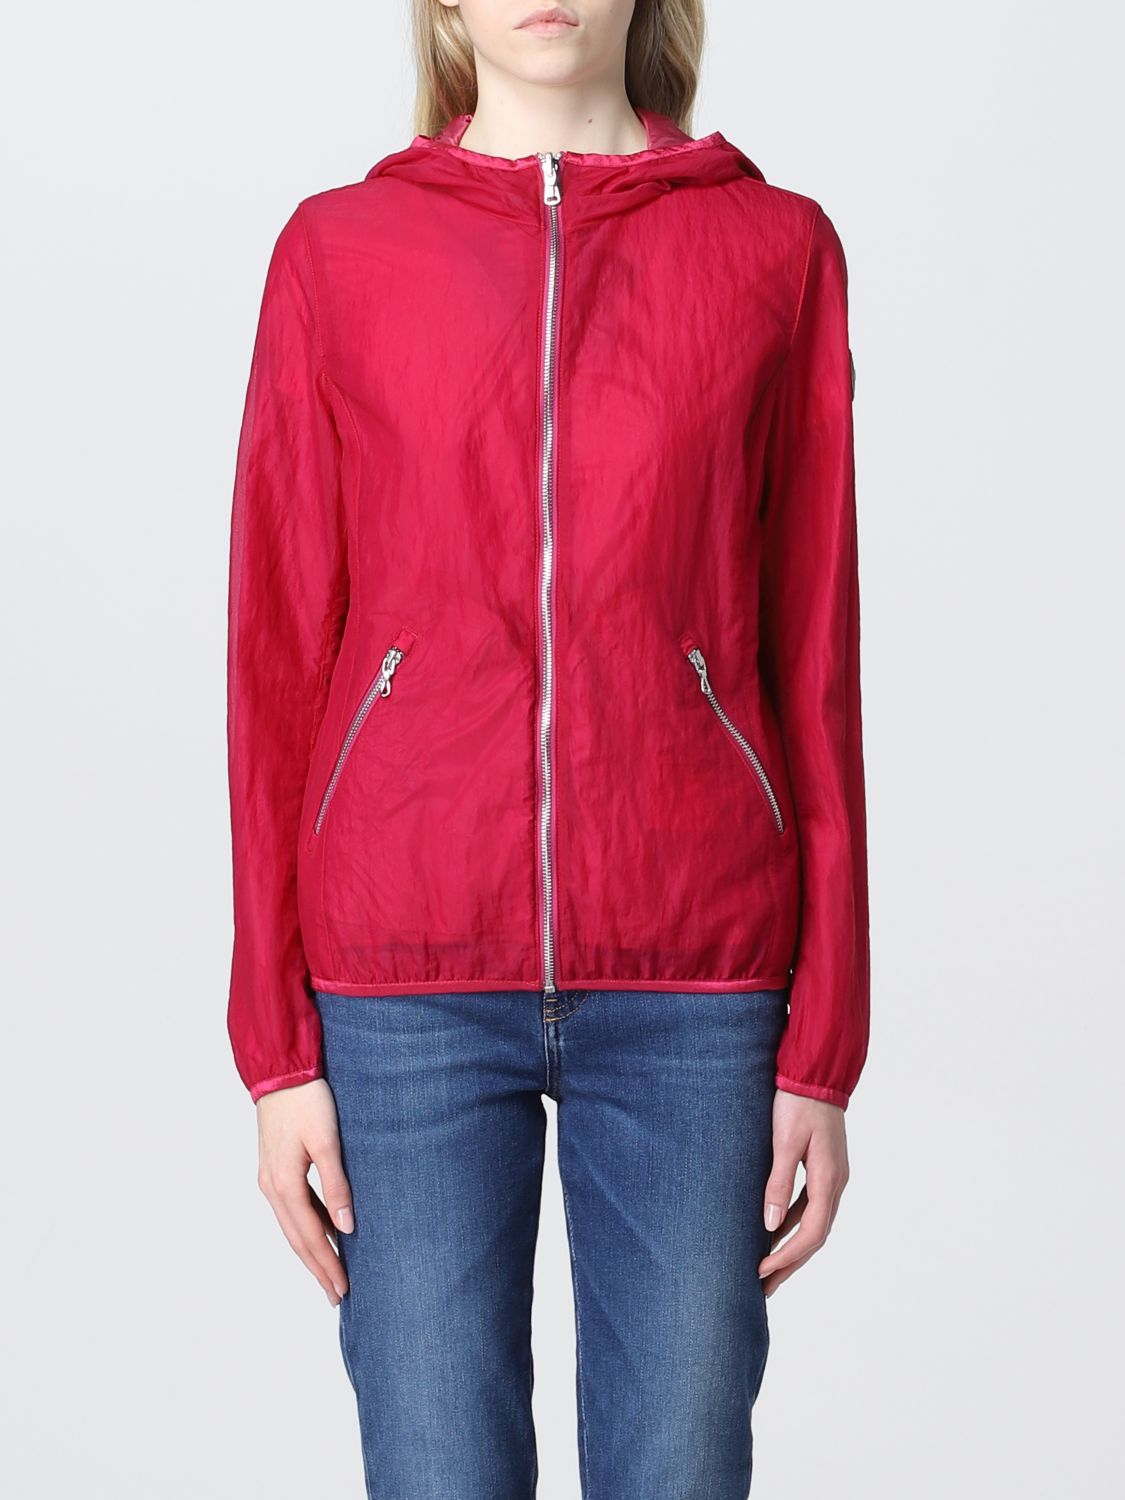 COLMAR: jacket for woman - Red | Colmar jacket 1967P8VU online at ...